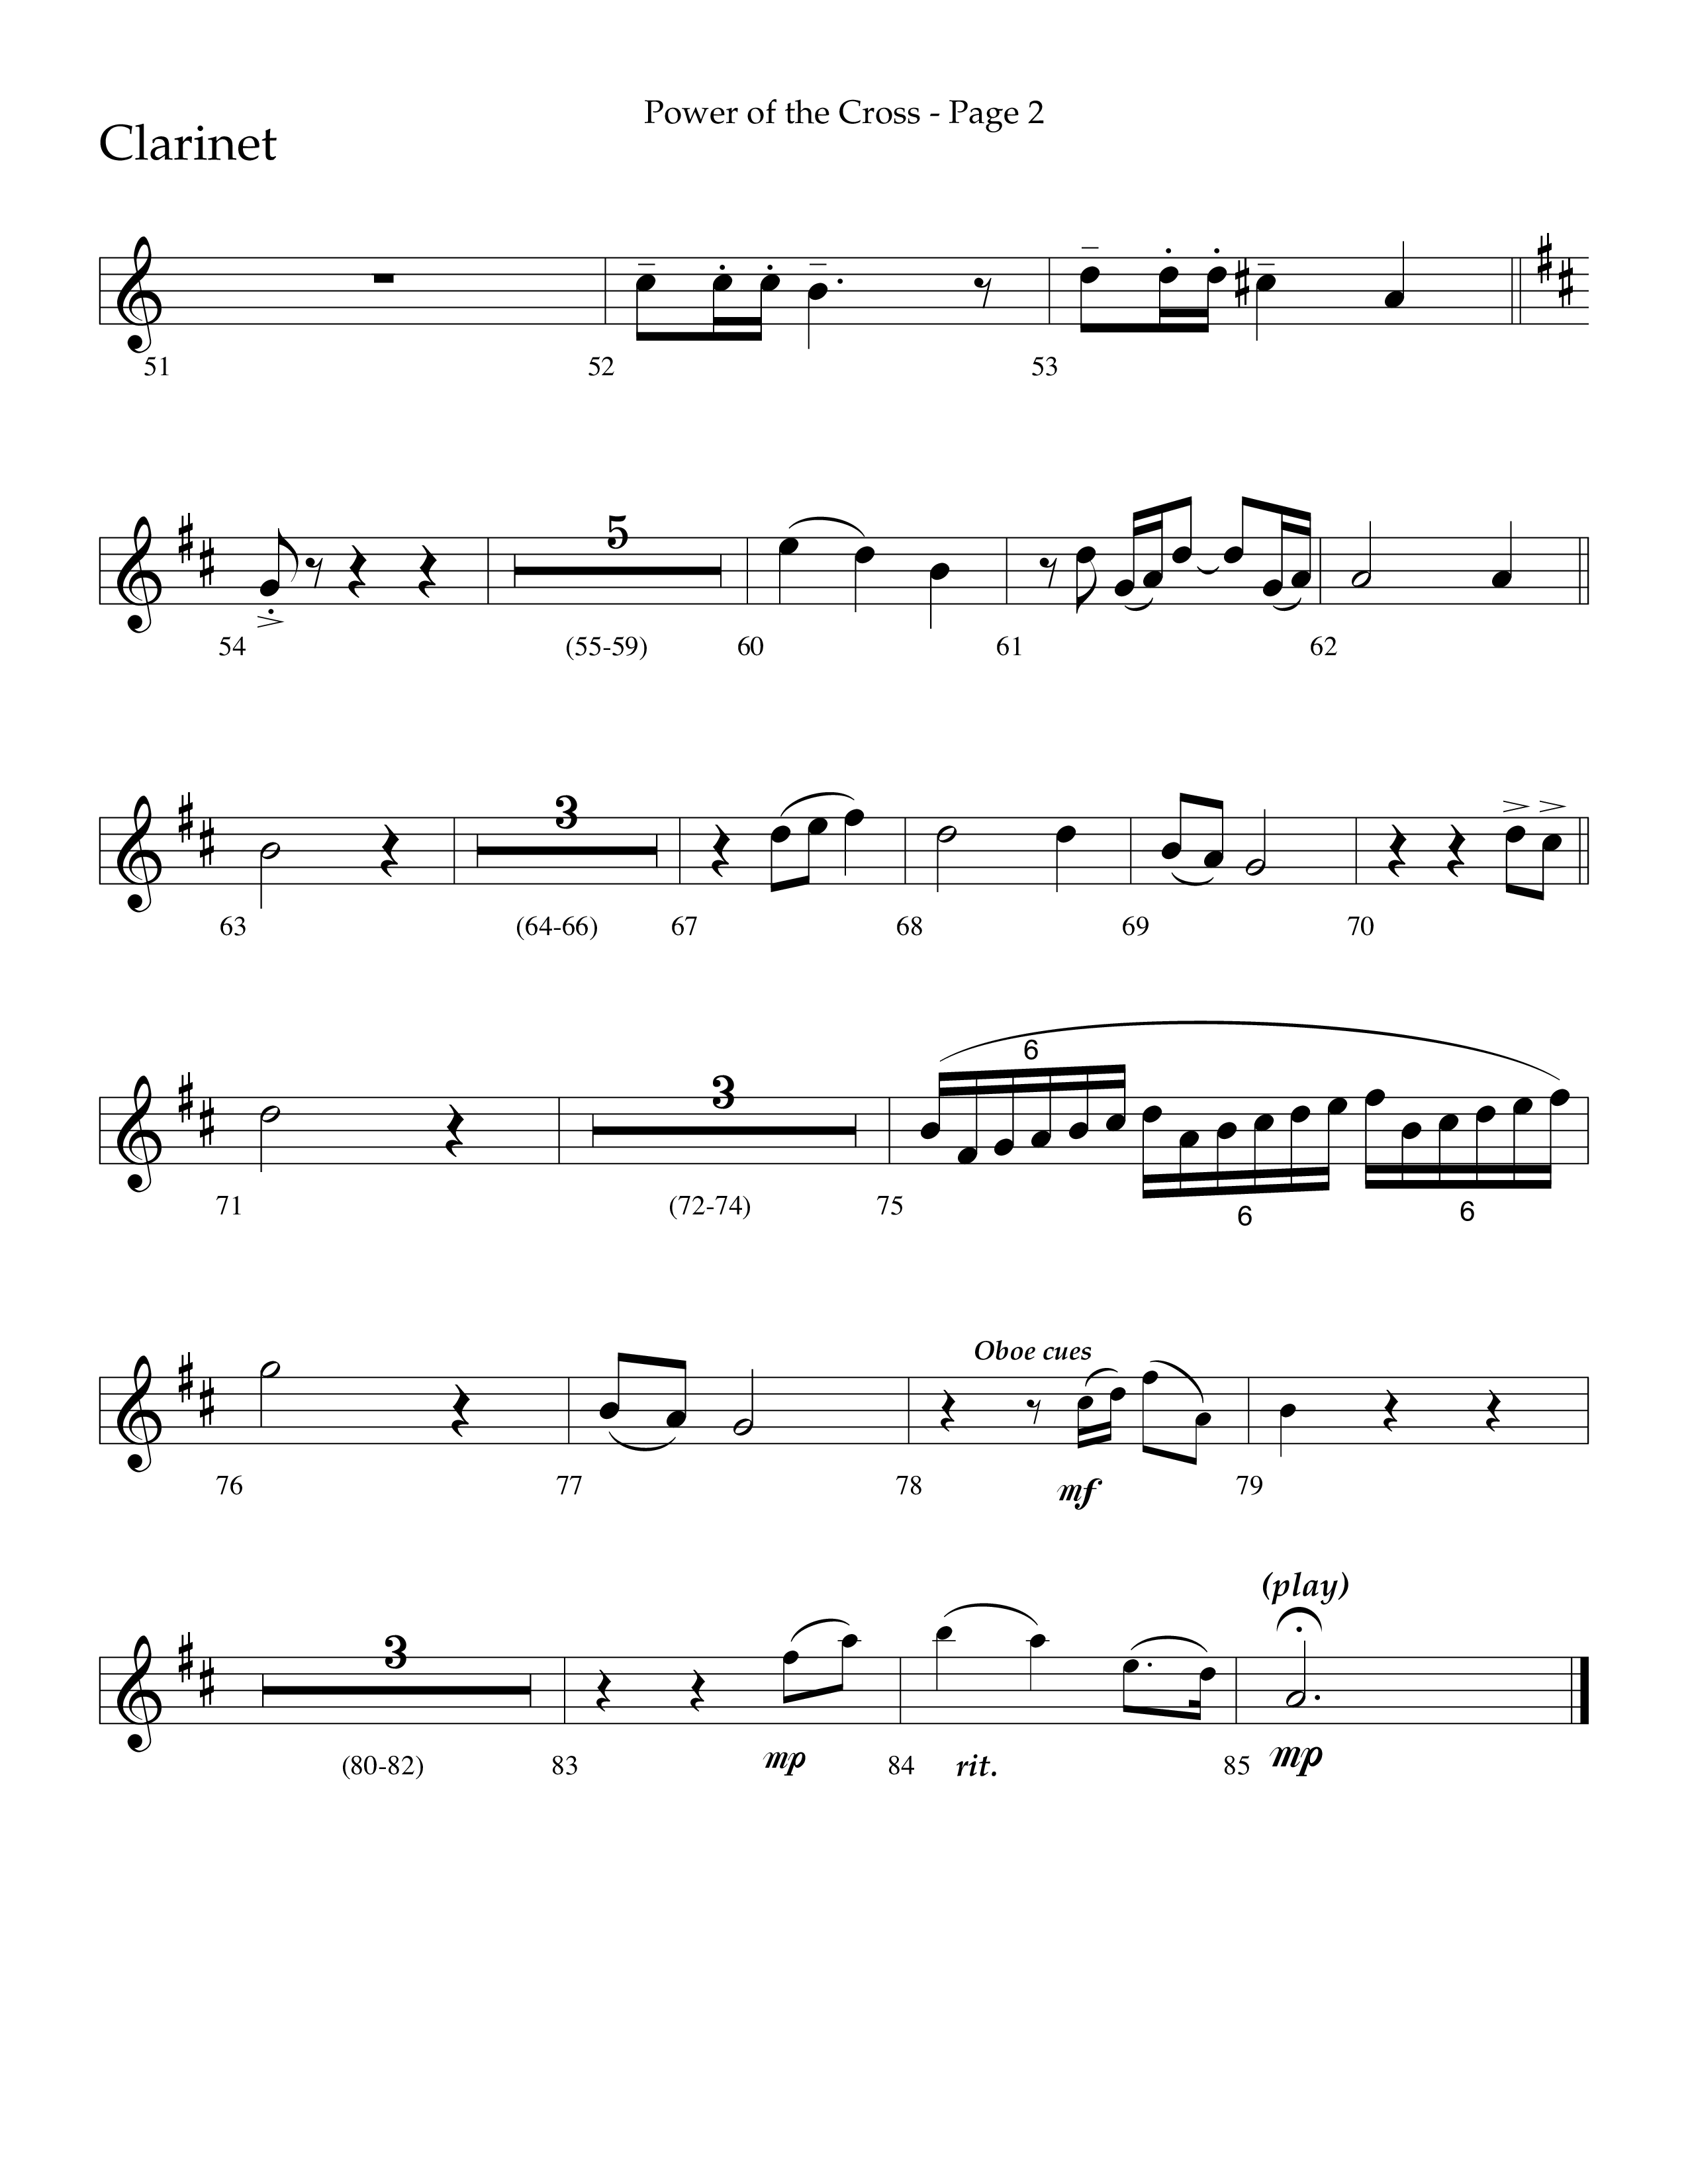 Power Of The Cross (Choral Anthem SATB) Clarinet 1/2 (Lifeway Choral / Arr. Russell Mauldin)